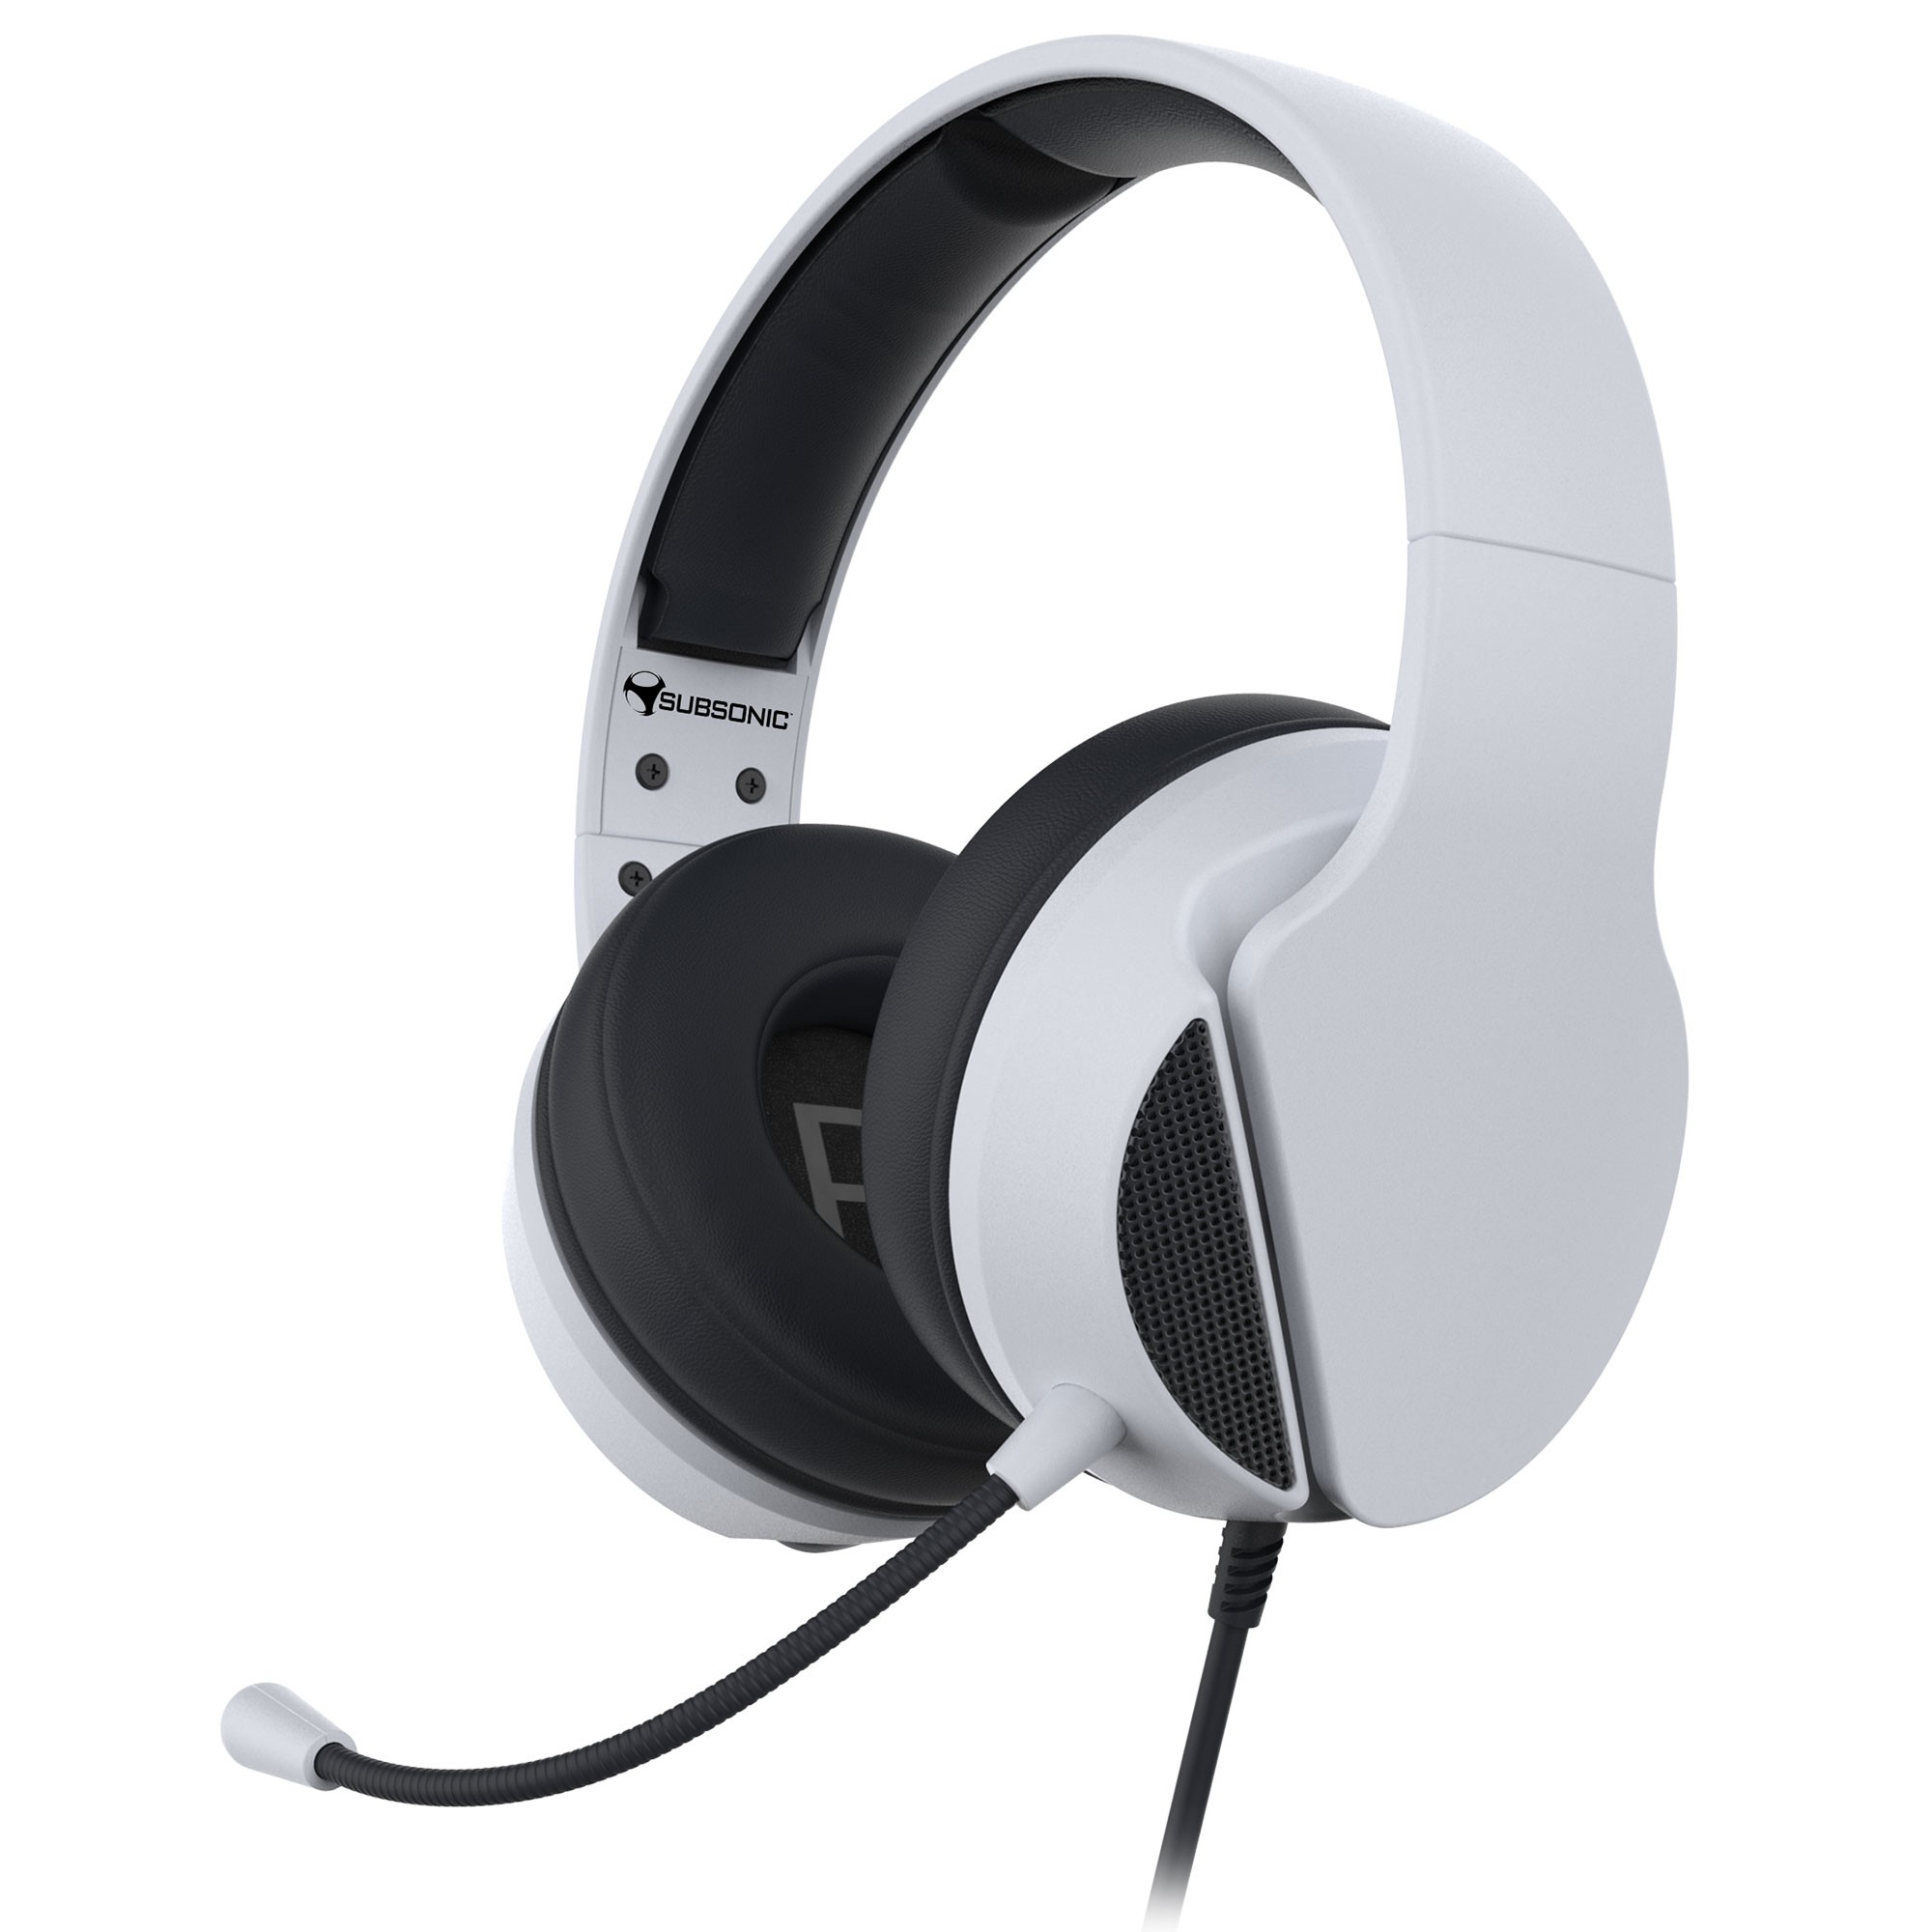 Game On: Finding the Perfect White Gaming Headset插图4